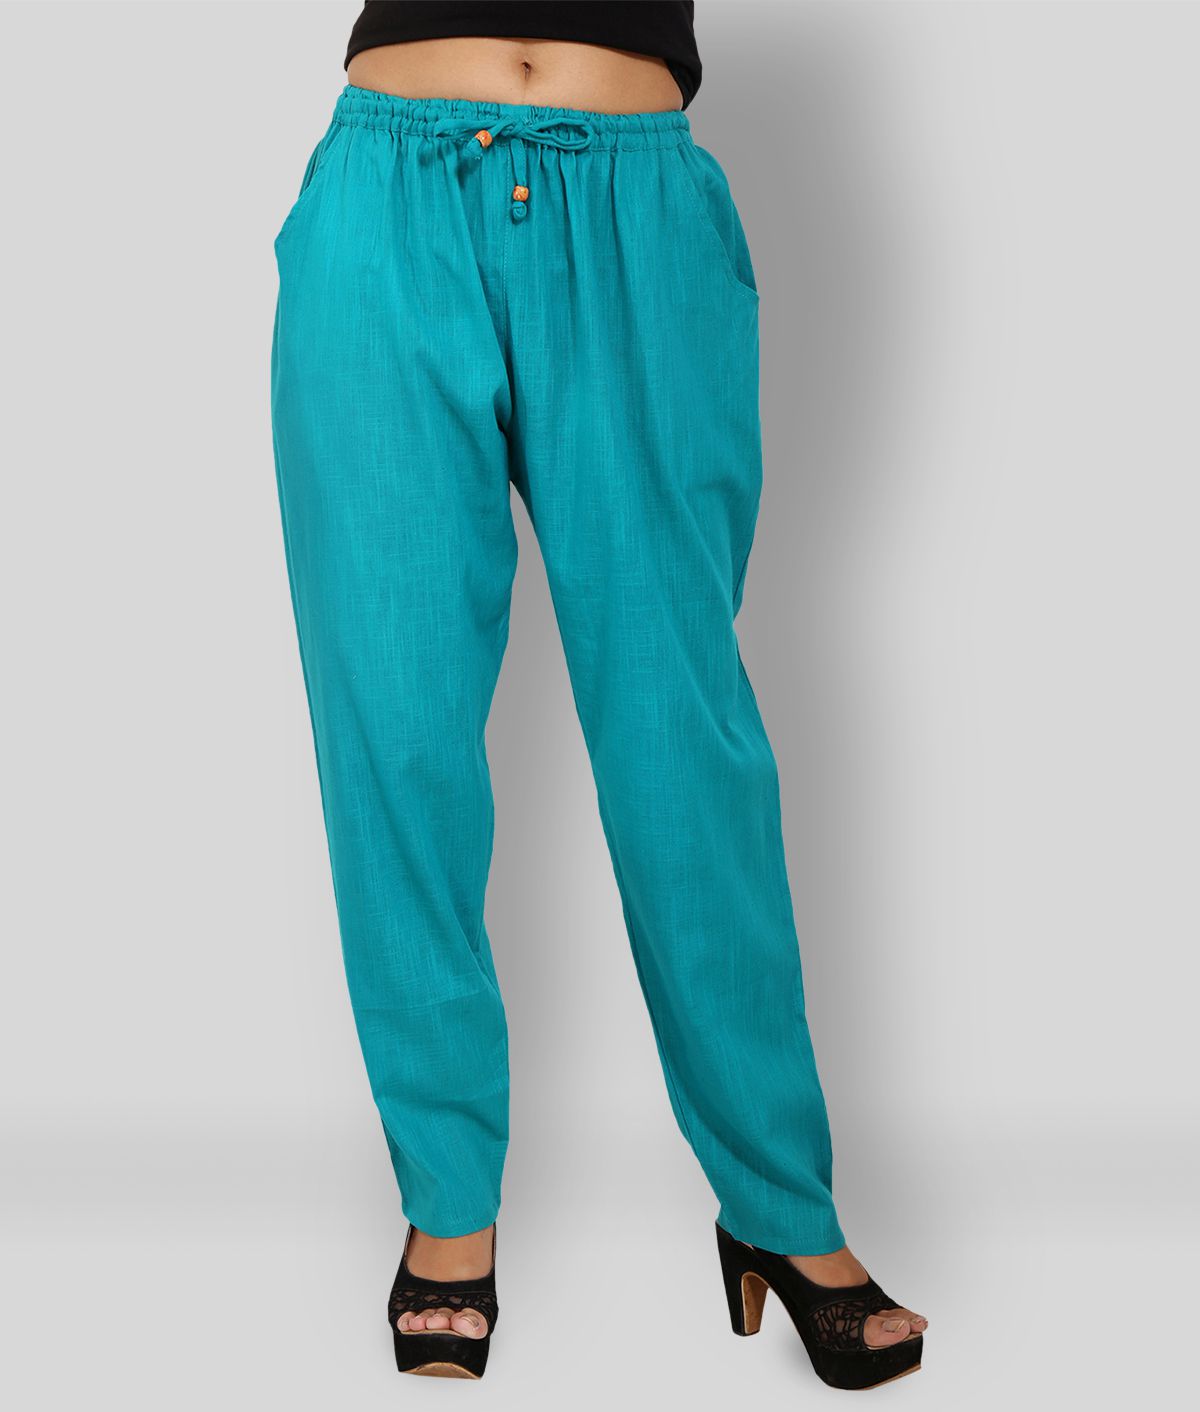     			Lee Moda - Turquoise Cotton Regular Fit Women's Casual Pants  ( Pack of 1 )